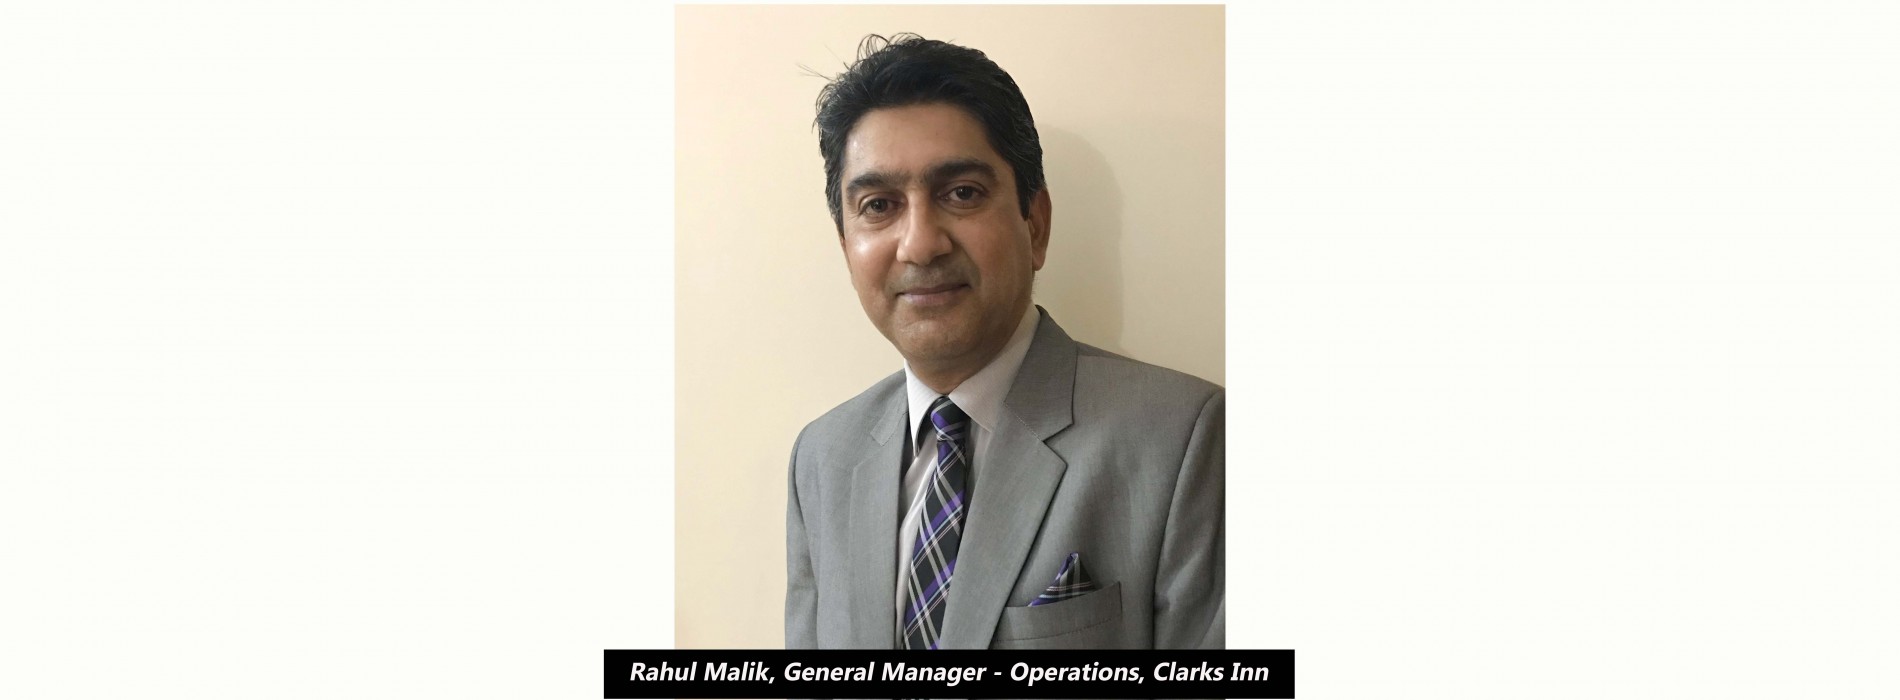 Clarks Inn appoints Rahul Malik as General Manager – Operations